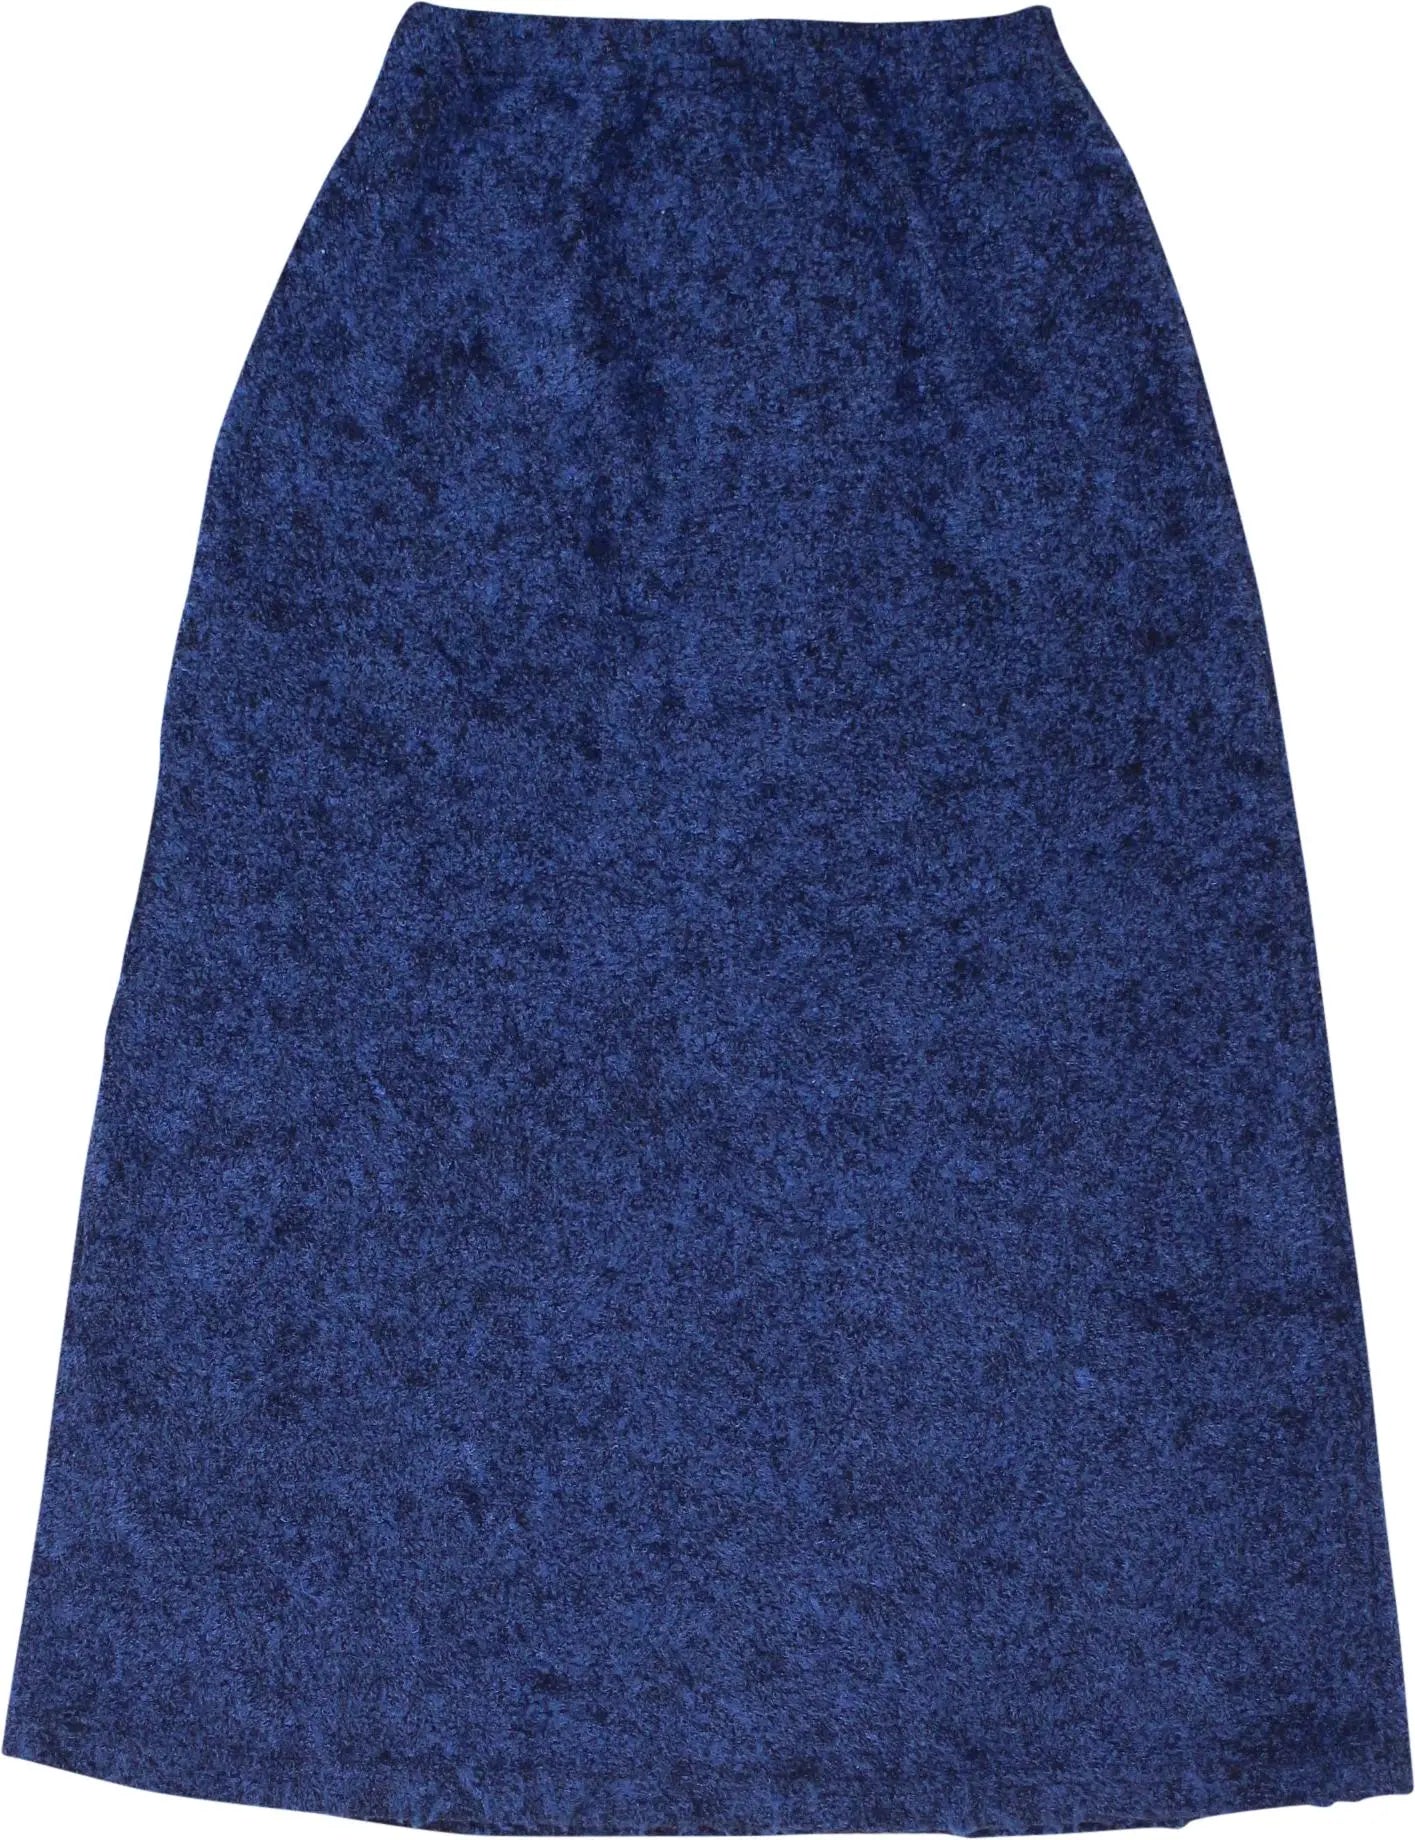 Unknown - Blue Fuzzy Skirt- ThriftTale.com - Vintage and second handclothing